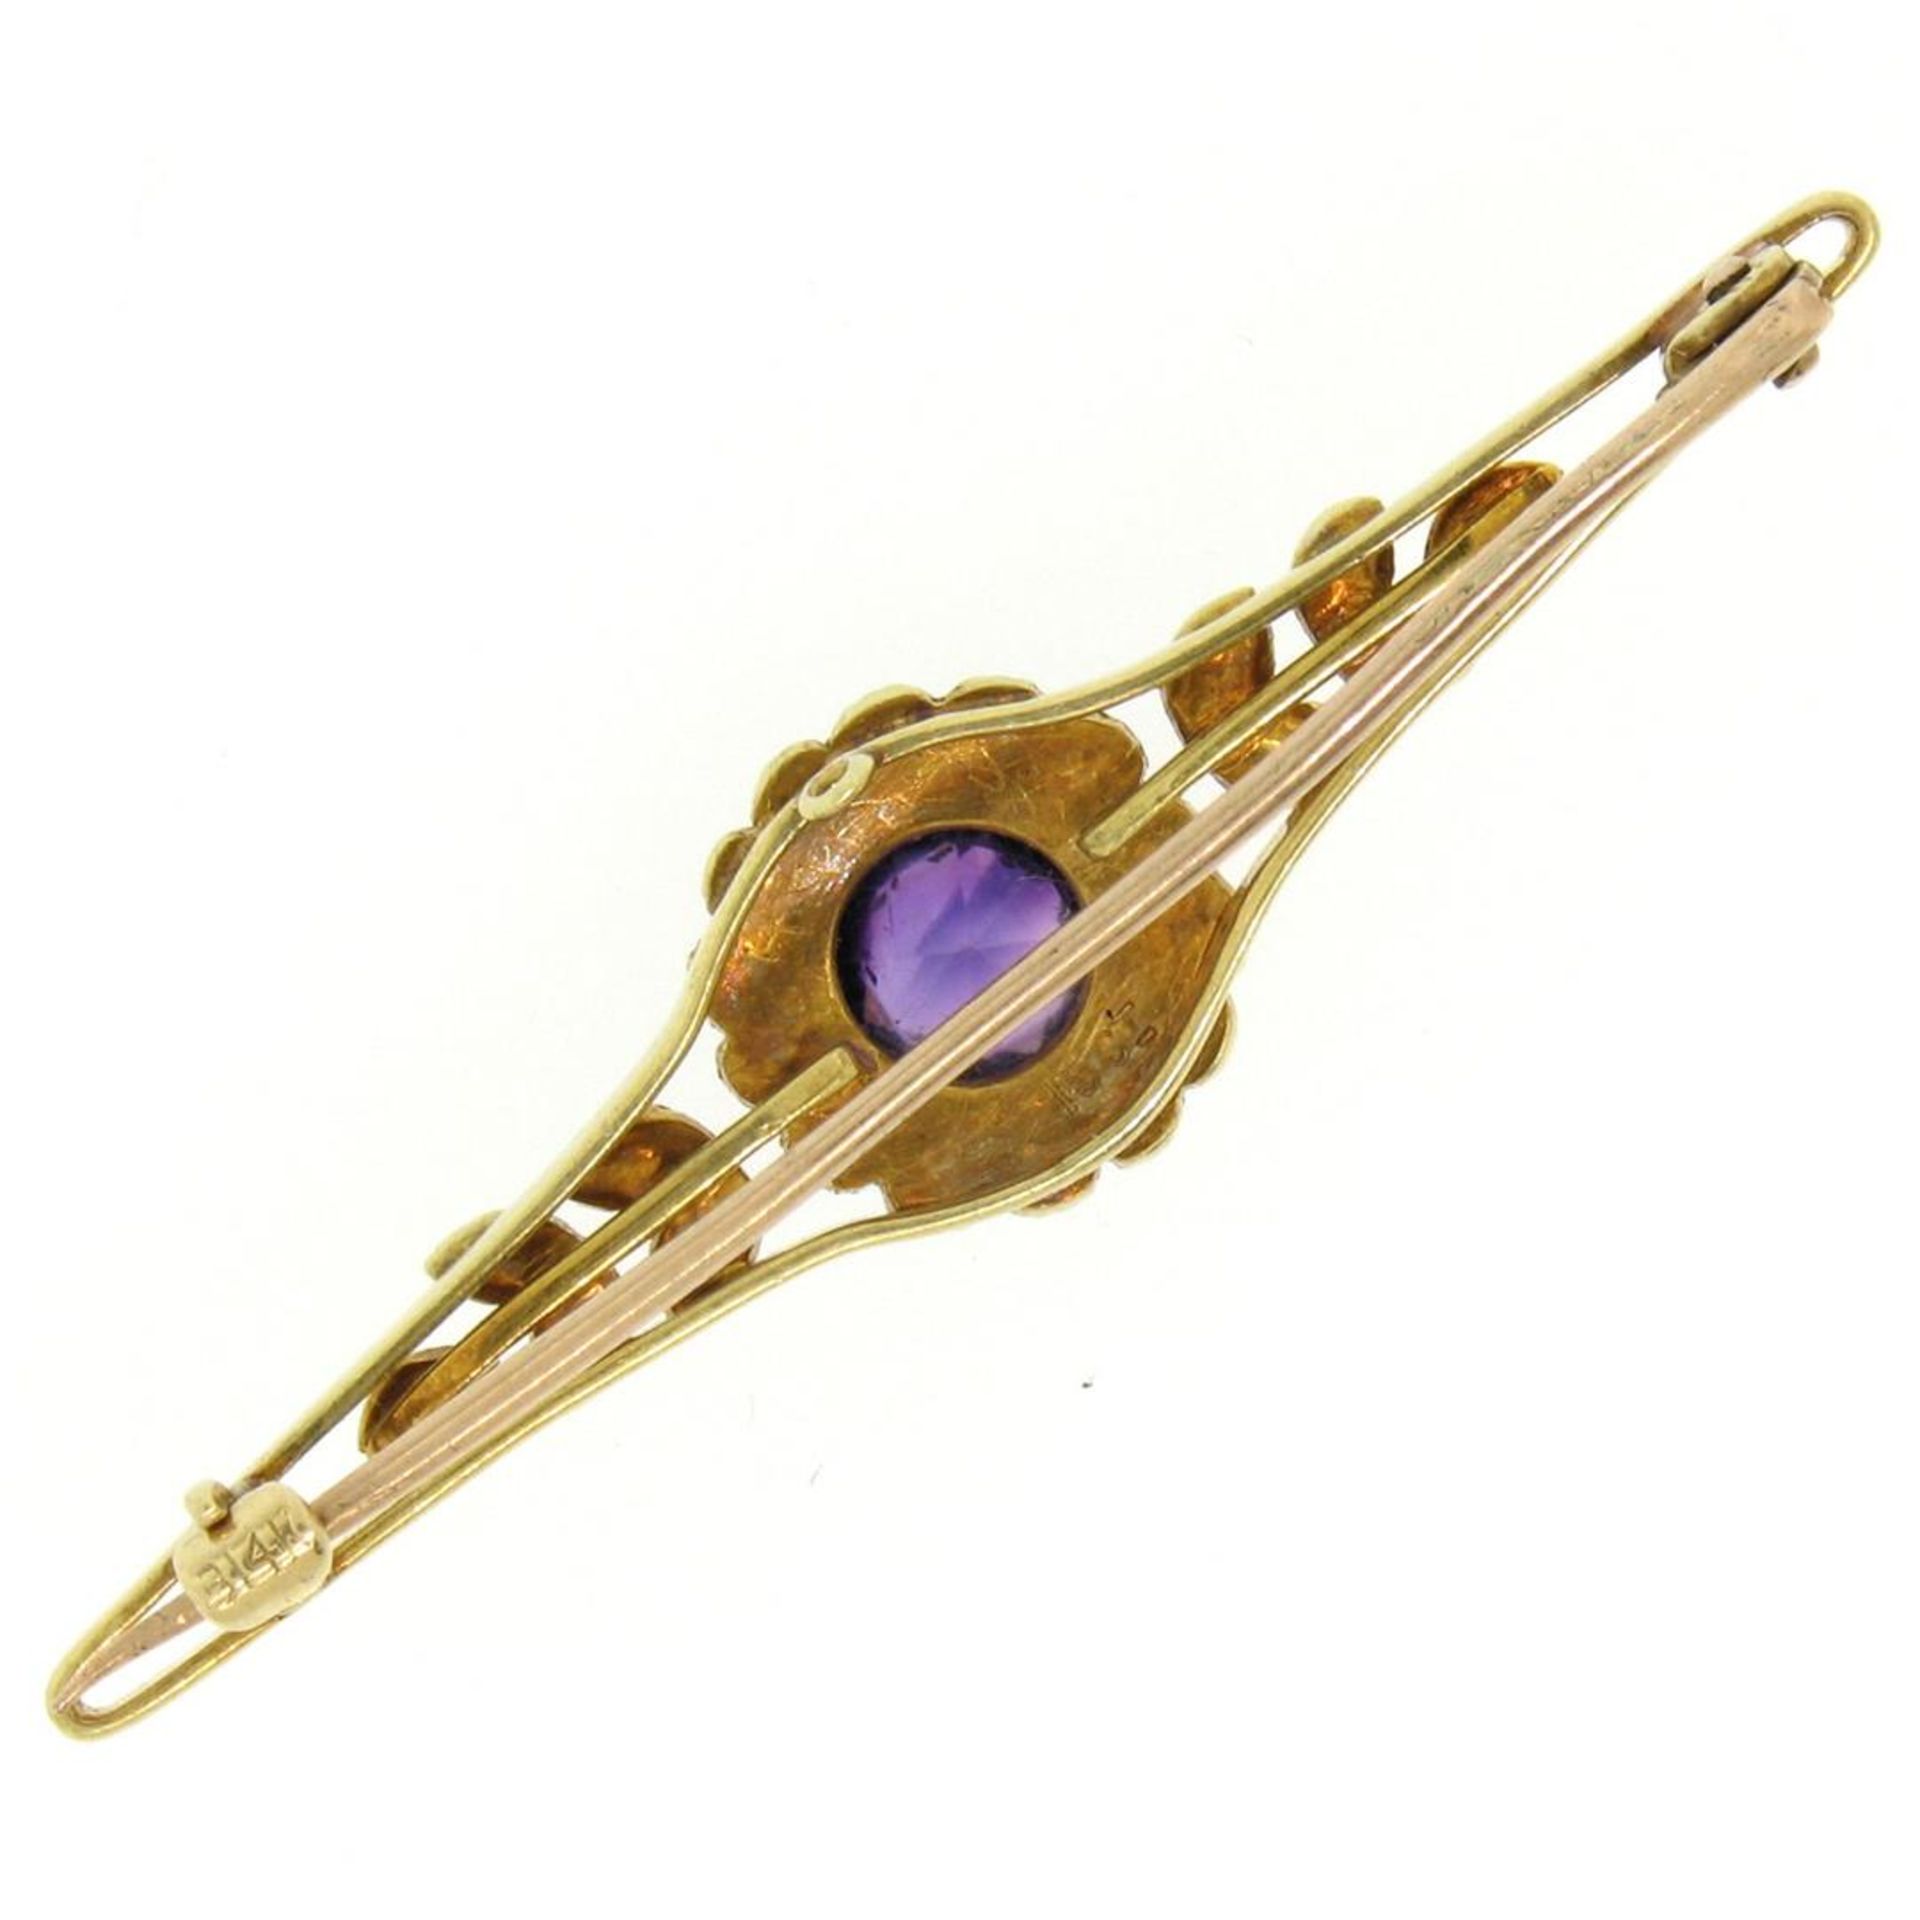 15k Yellow Gold .64 ct Old Cut Amethyst & Seed Pearl Brooch Pin - Image 3 of 8